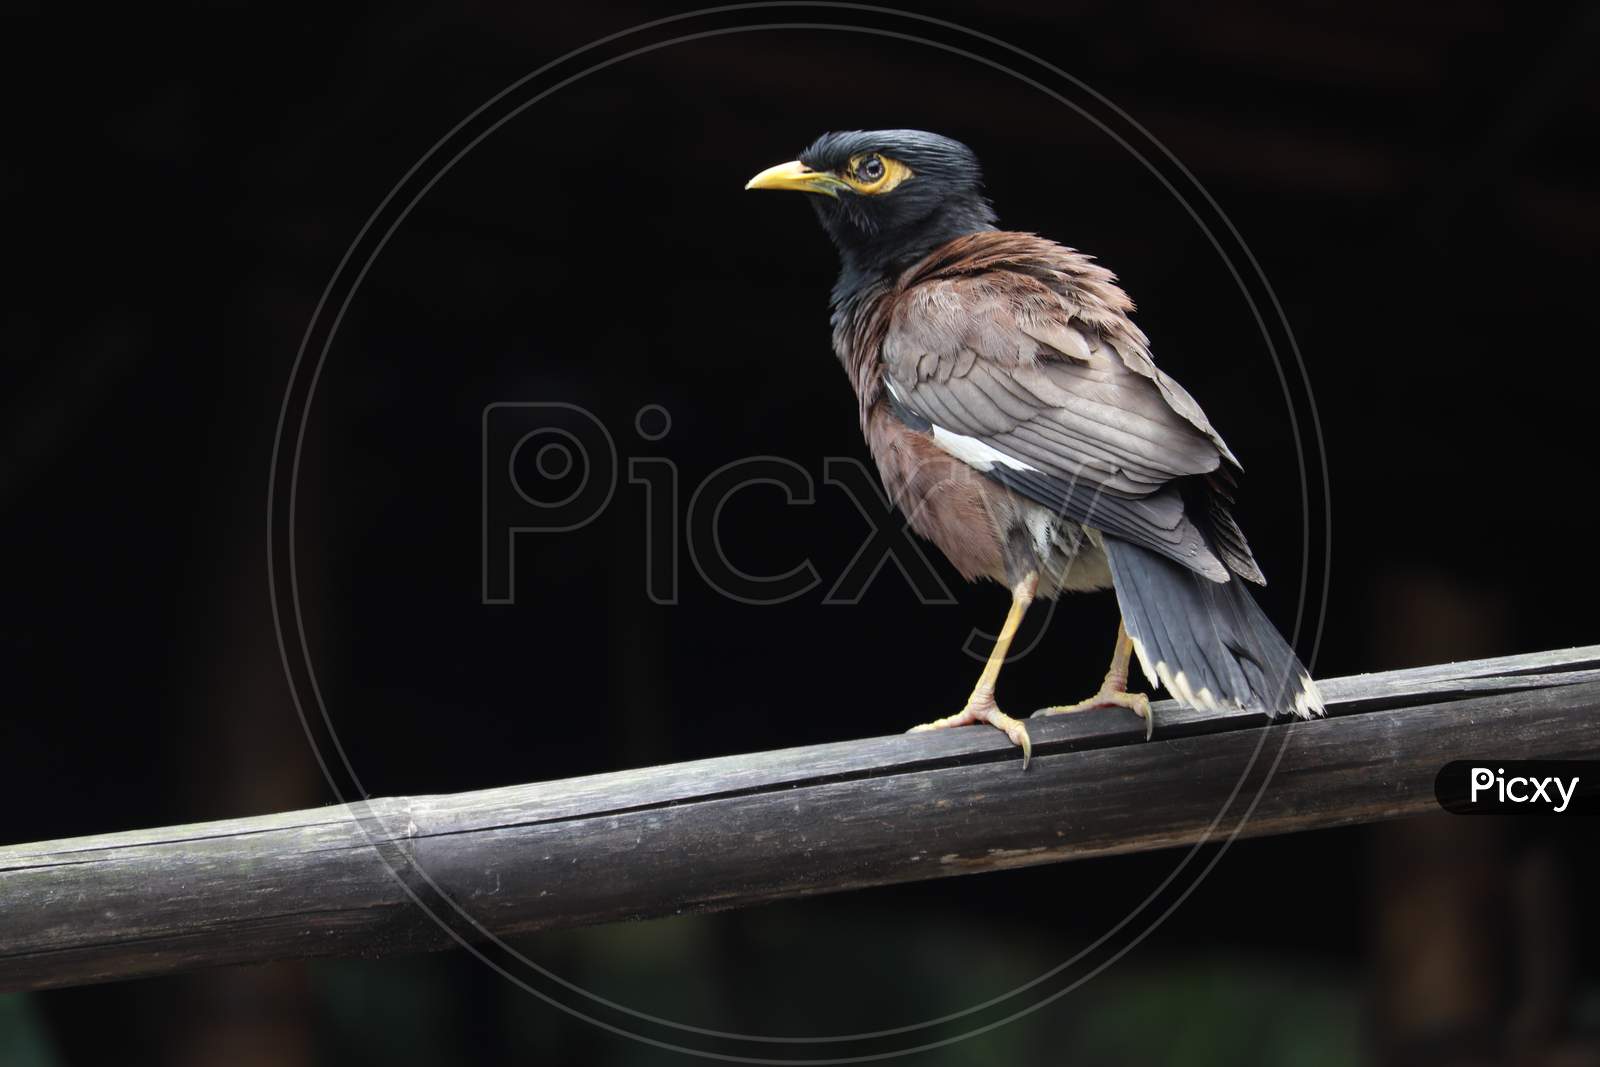 Mynah Is Standing On Old Bamboo And Looking Somethings For Eat. Common Myna Finding Food.The Common Myna Or Indian Myna In Bangladesh,Asia.Back Side And Font Side Of Myna.Acridotheres.Wildlife